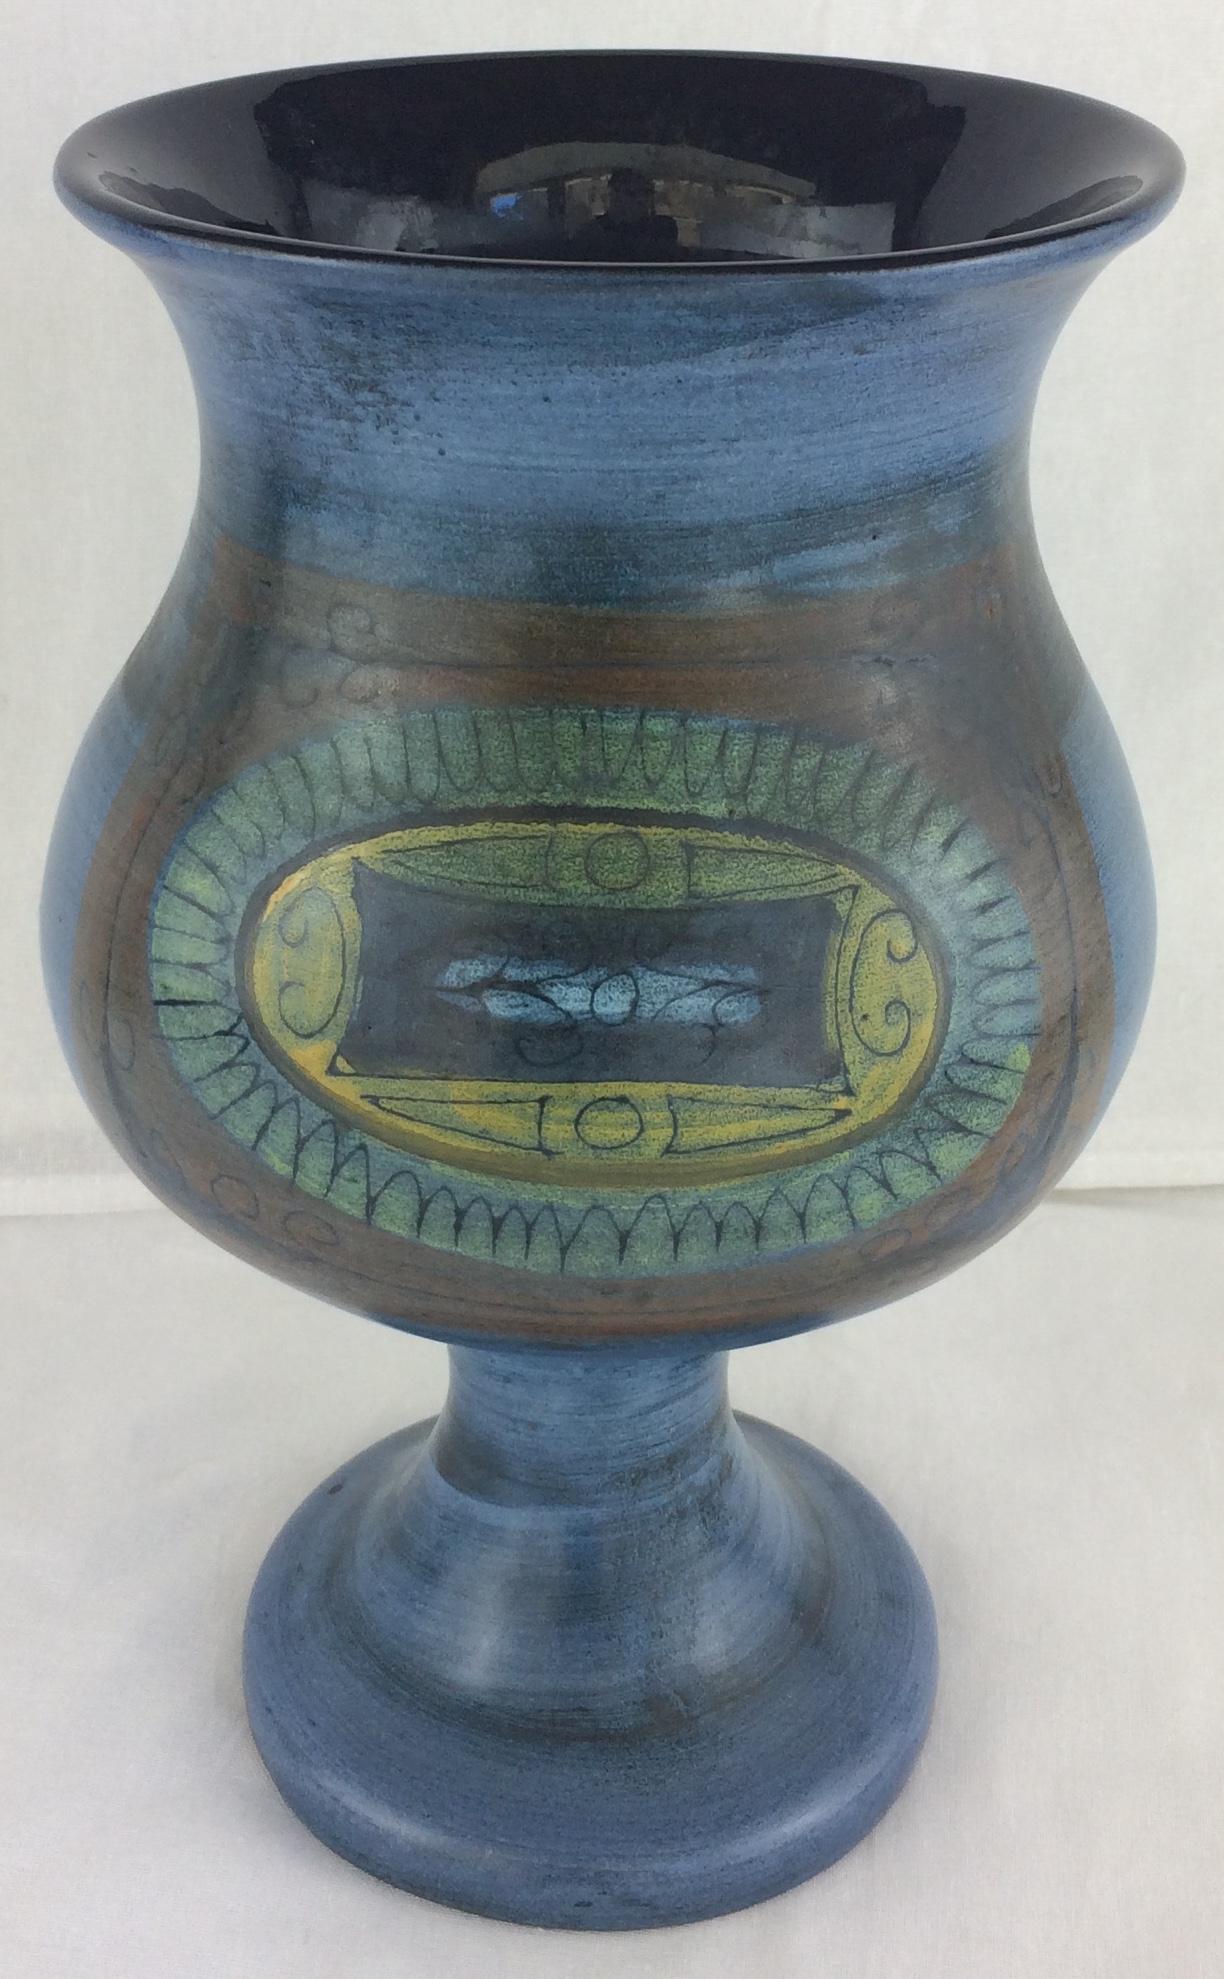 This blue vase is decorated by some stylized friezes on the body of the piece created by Jean de Lespinasse. 
Signed.

Resisting on the French Riviera during the Second World War, Jean de lespinasse created with his wife the Socfra produced